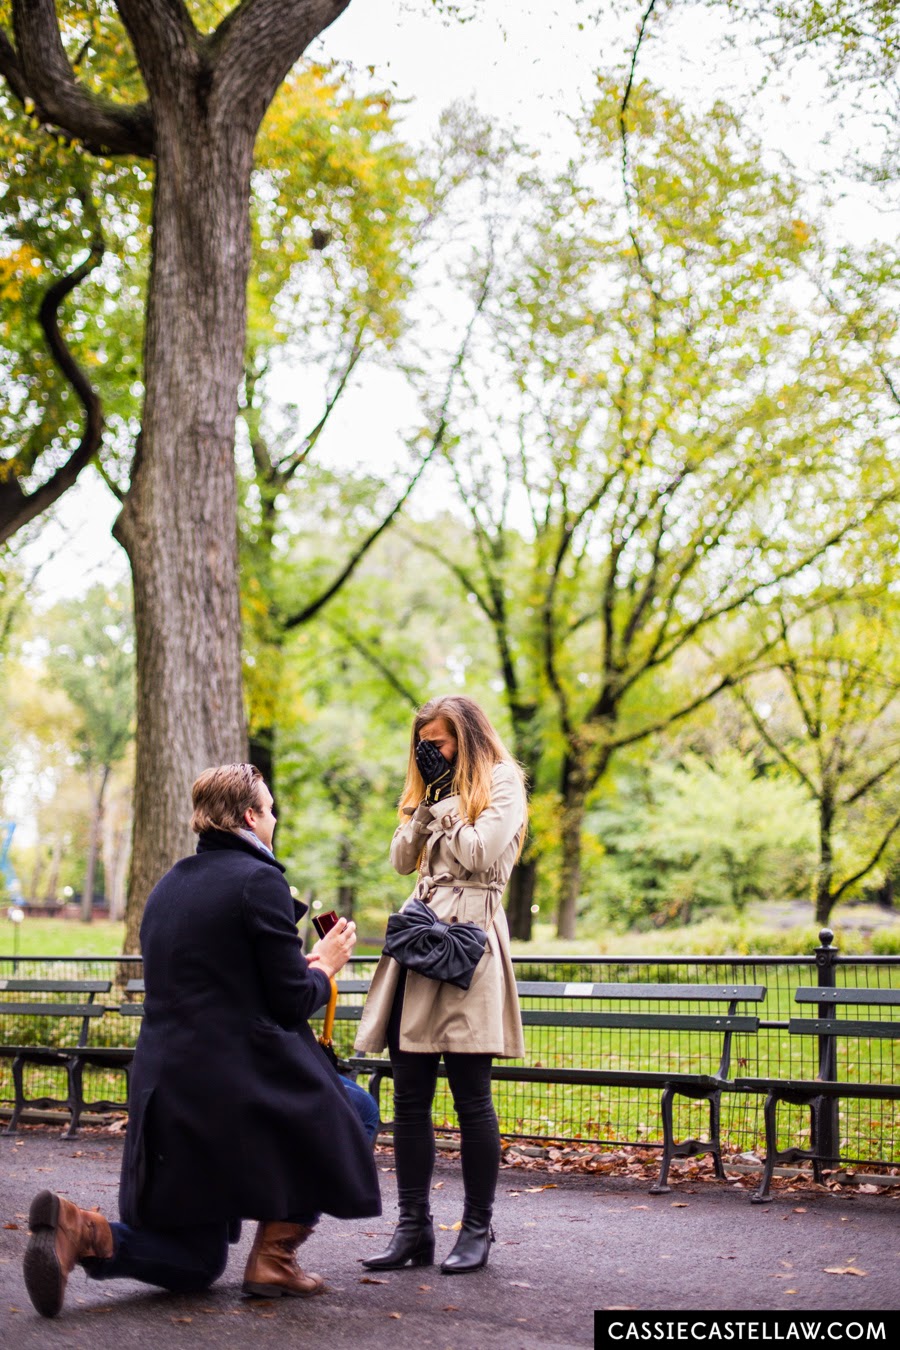 Romantic proposal in The Mall under American Elm trees in Fall, Central Park Lifestyle Engagement Portraits NYC - www.cassiecastellaw.com